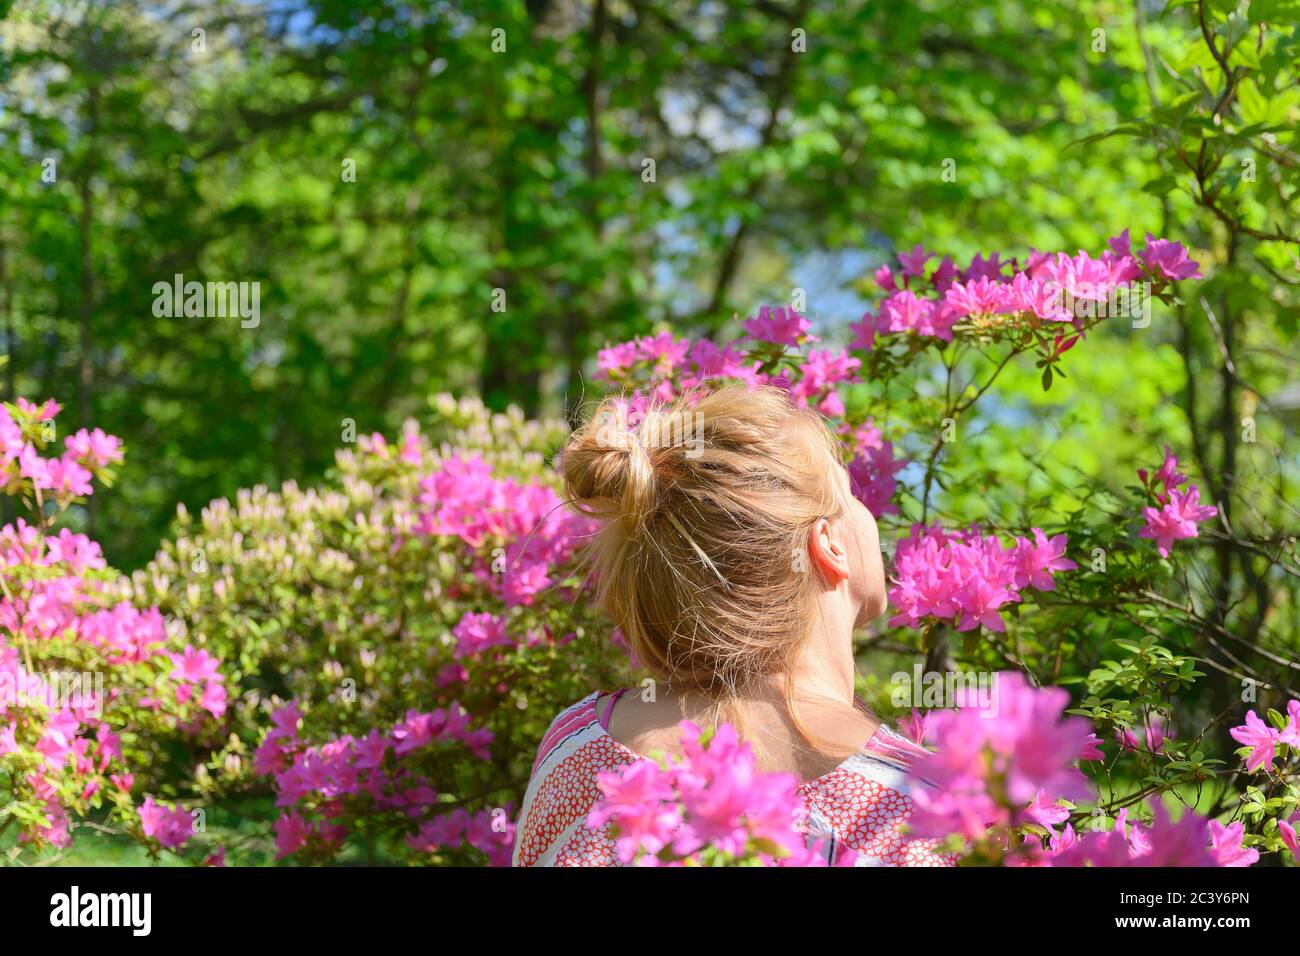 Woman smelling pink flowers Stock Photo